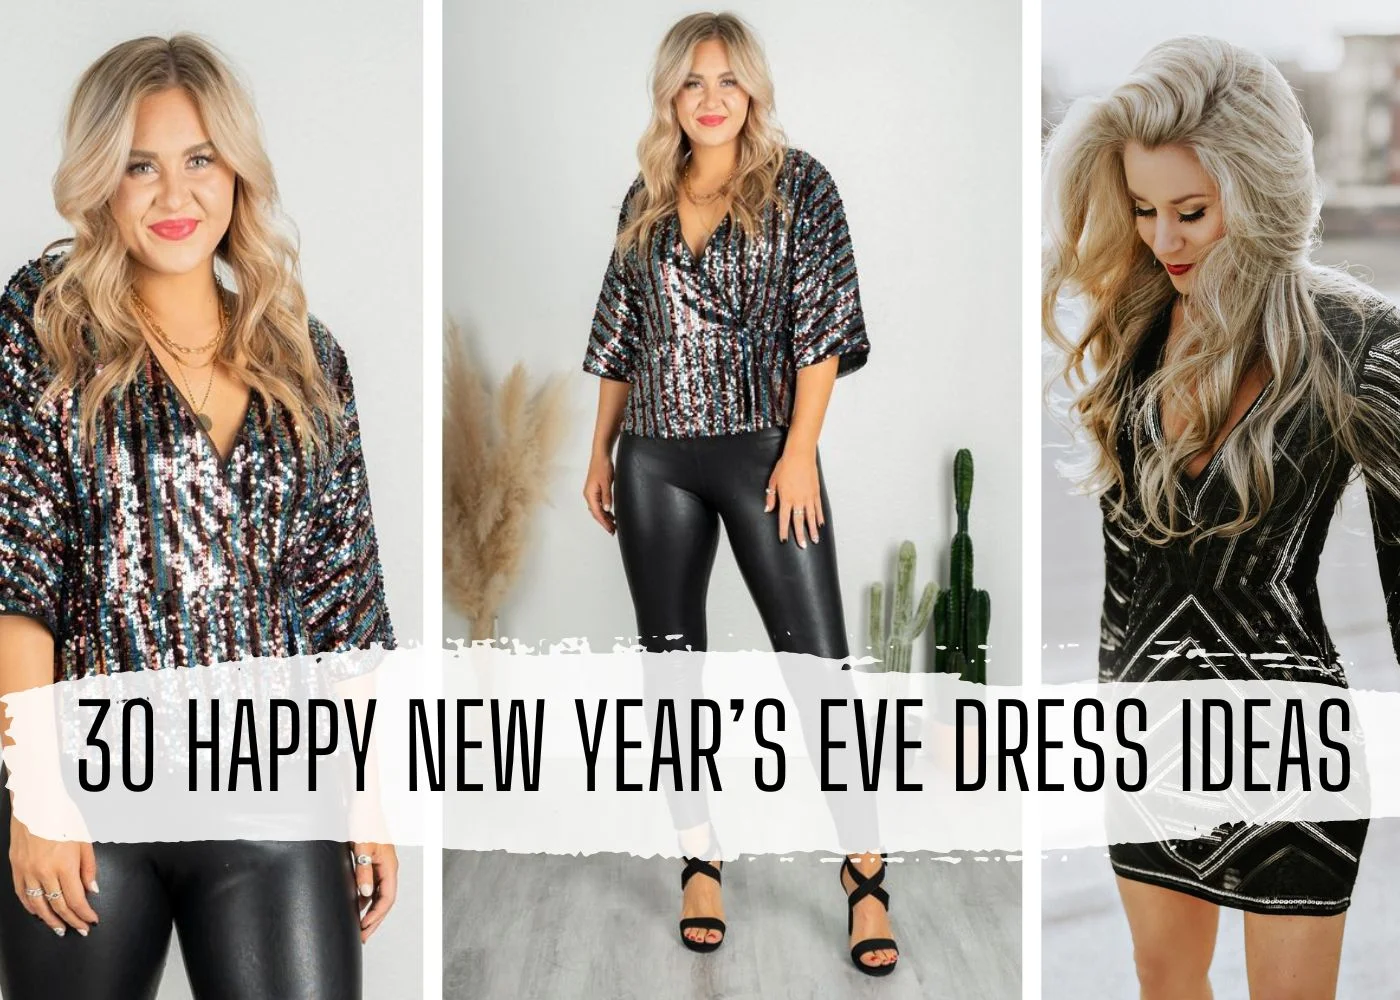 Top 30 Happy New Year’s Eve Dress Ideas to Welcome the Year in Style